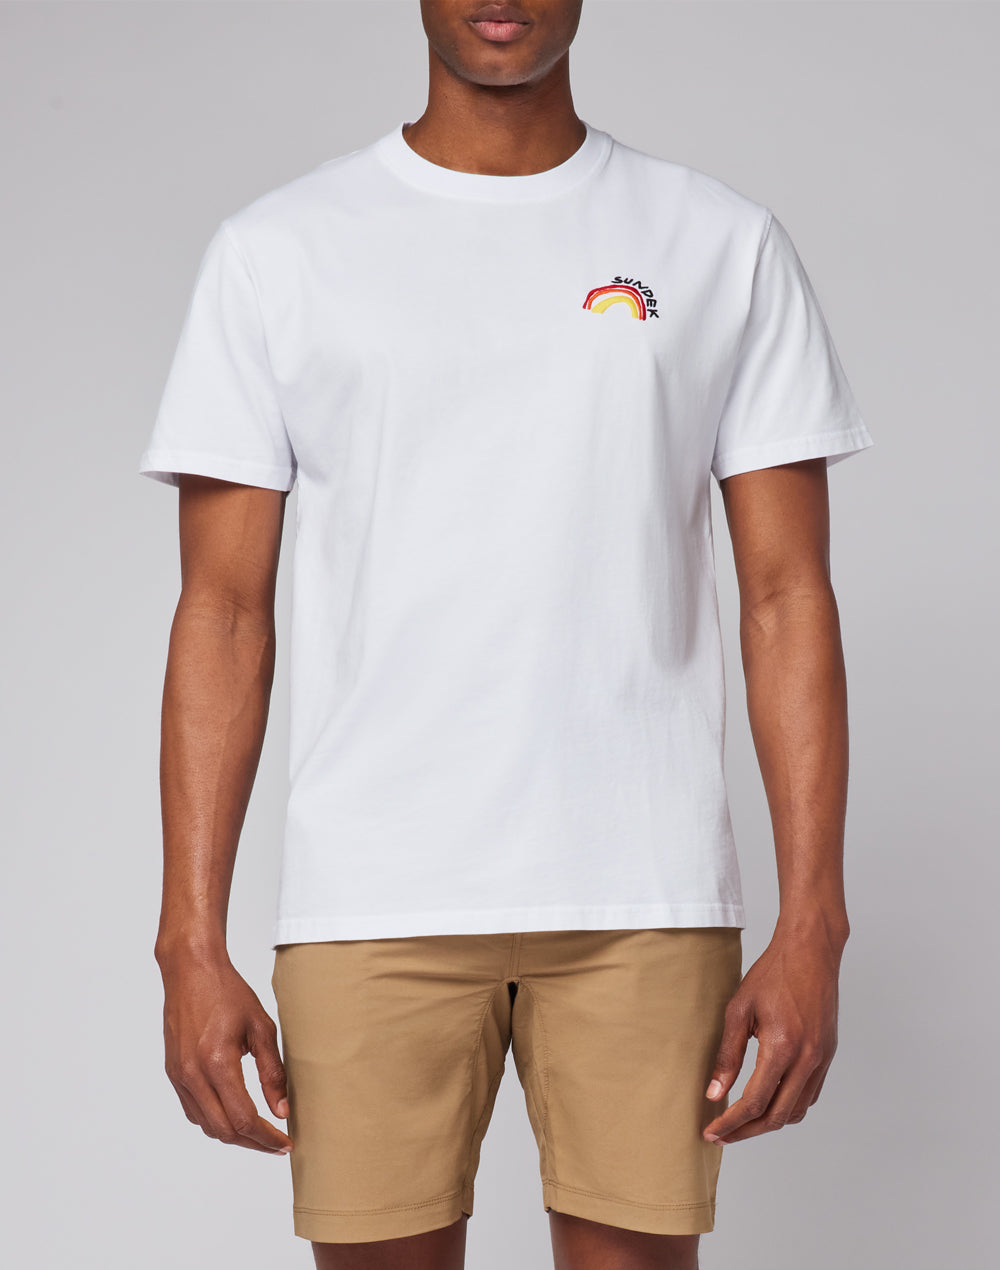 RAINBOW EMBROIDERED CAPSULE T-SHIRT